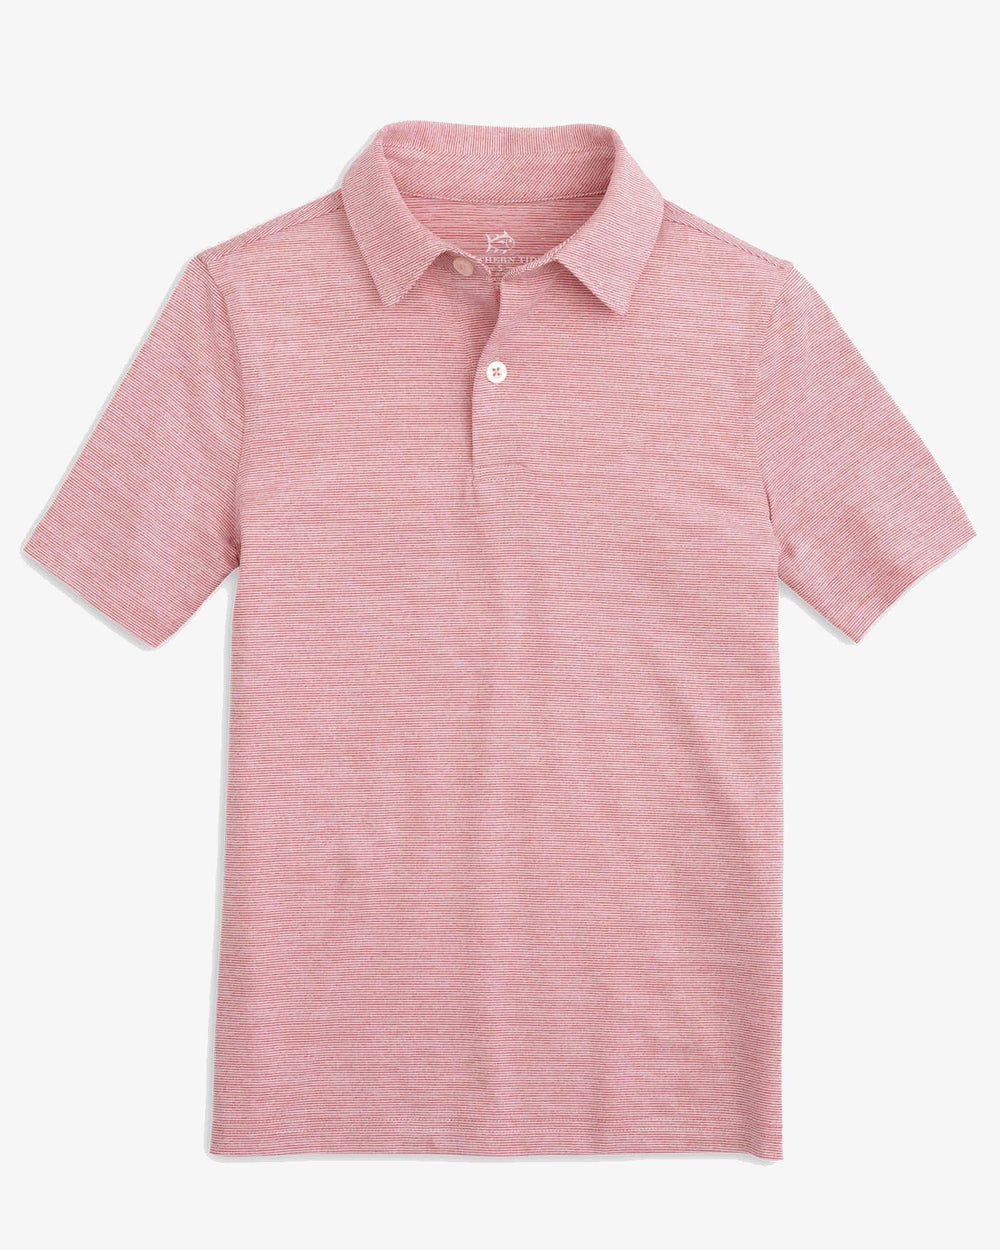 The front view of the Southern Tide Team Colors Boy's Driver Spacedye Polo Shirt by Southern Tide - Varsity Red